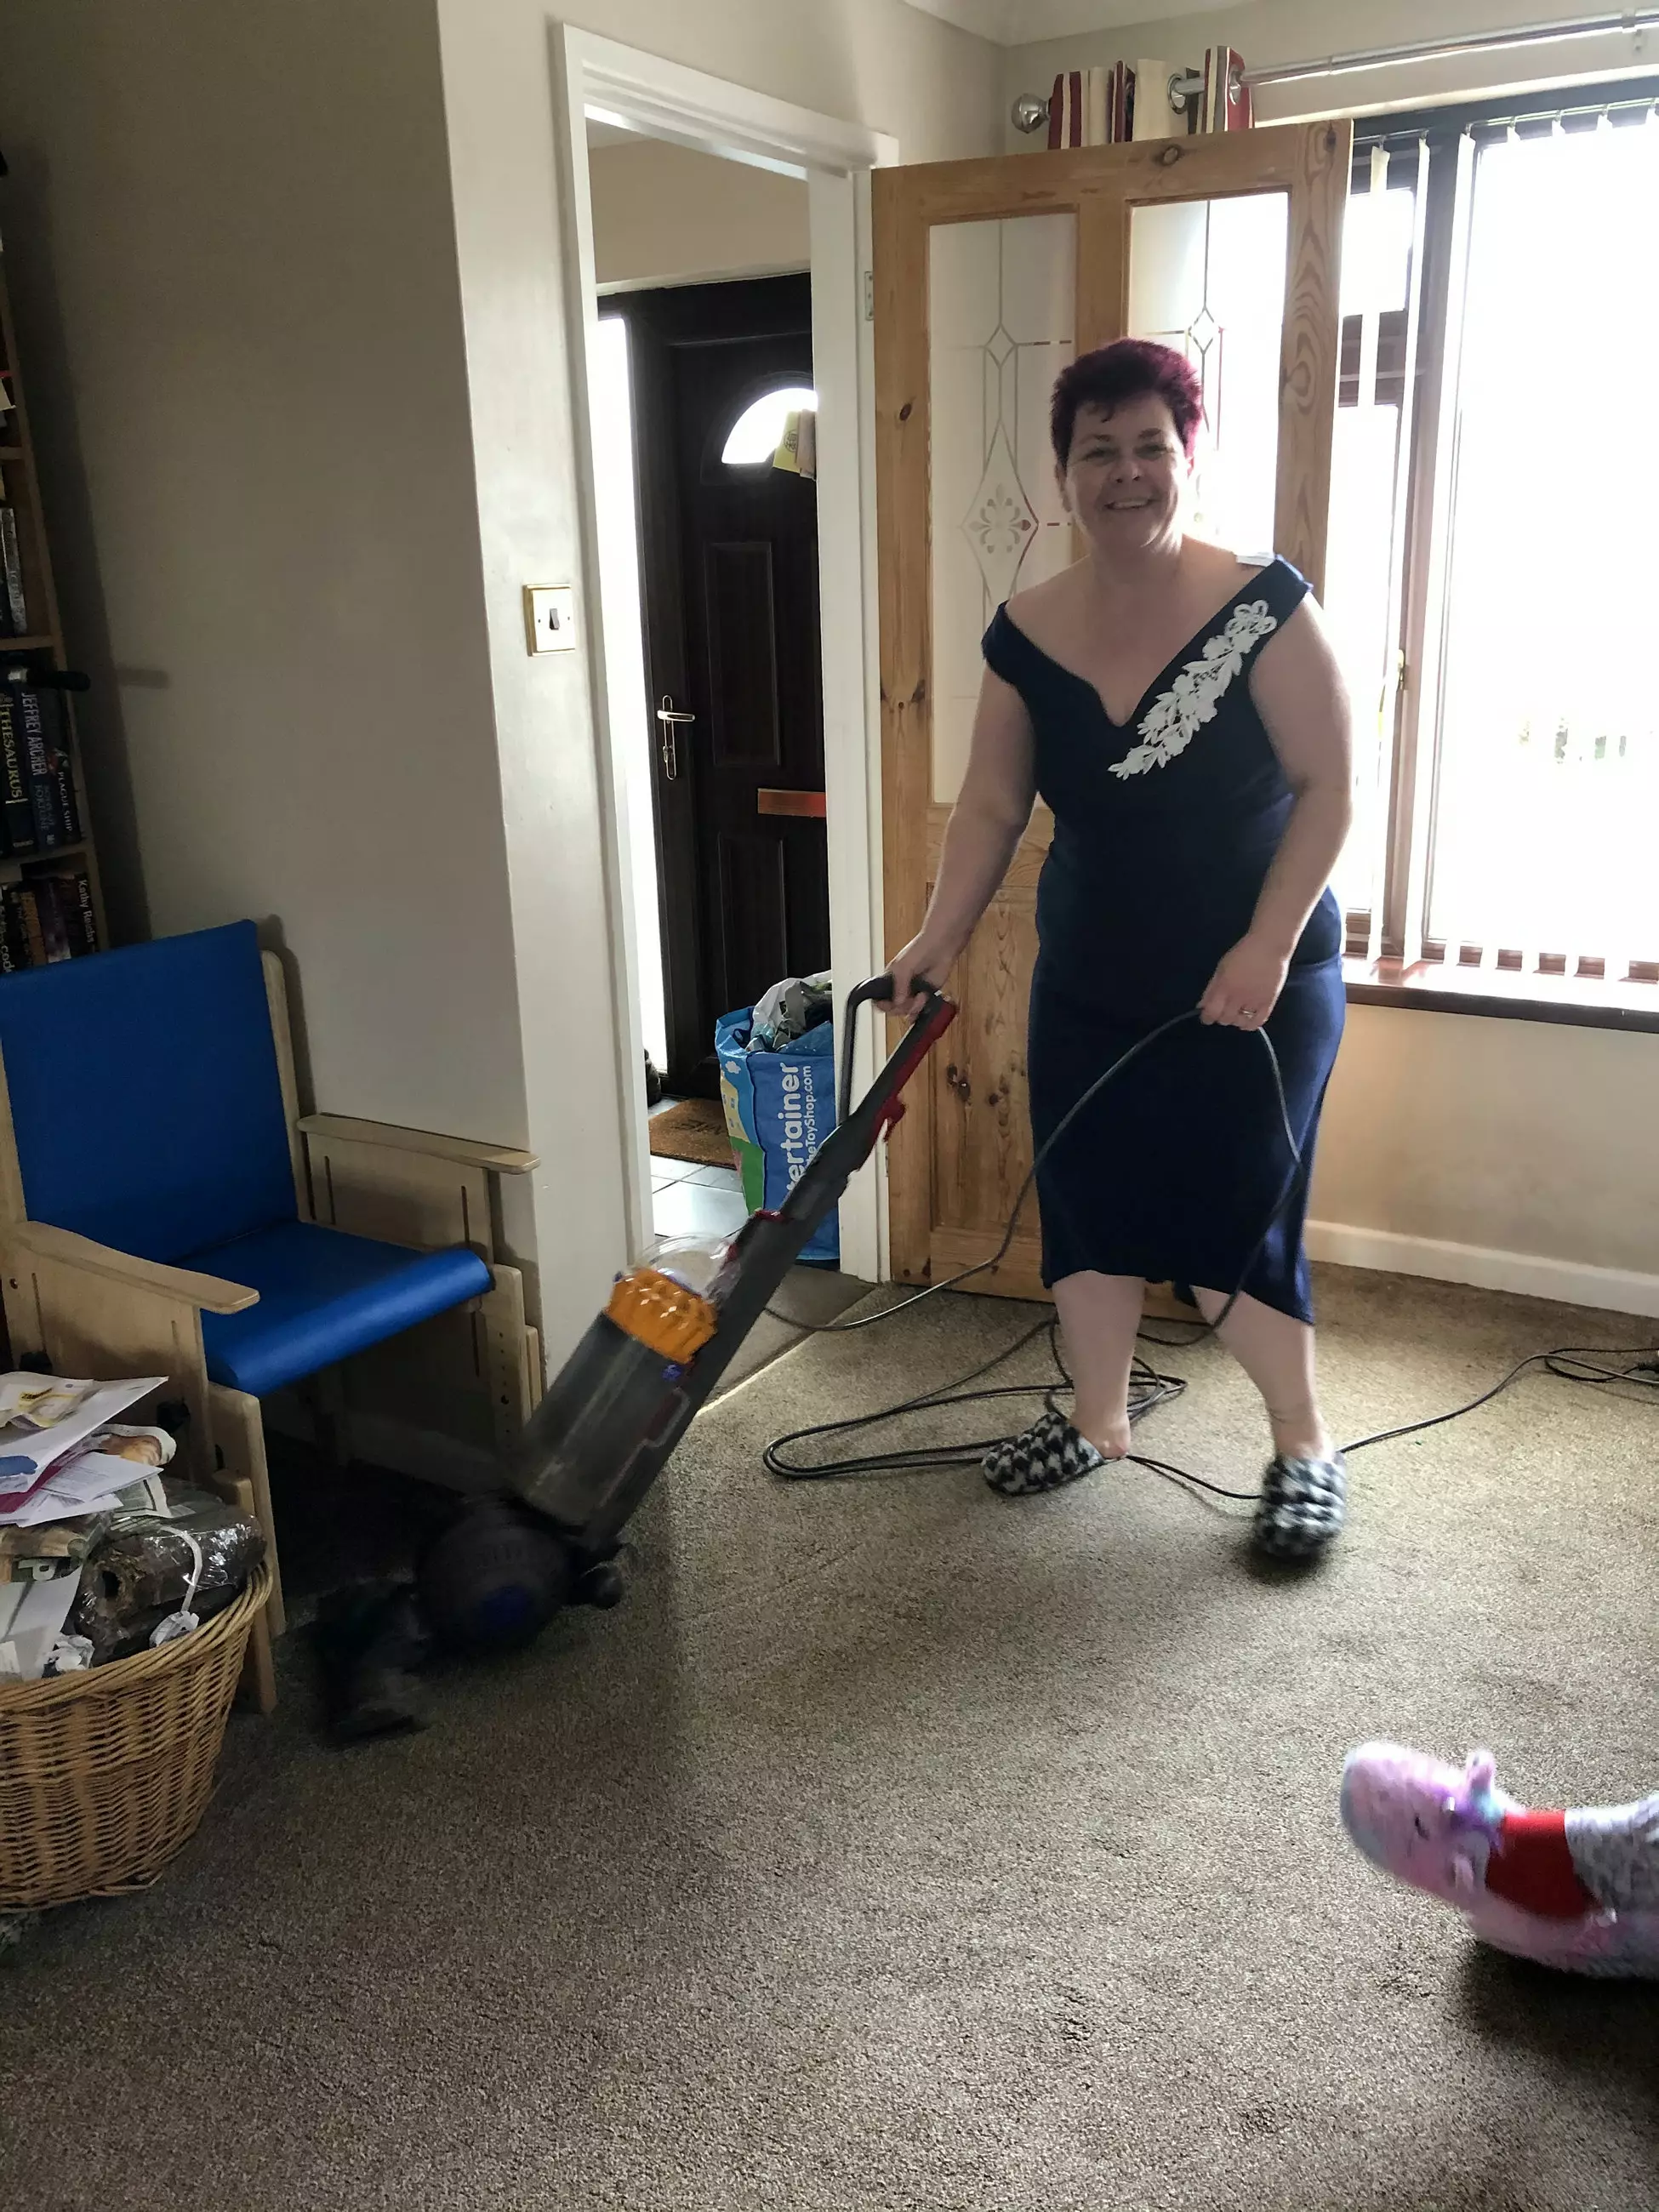 How about a cocktail dress for a spot of hoovering? (